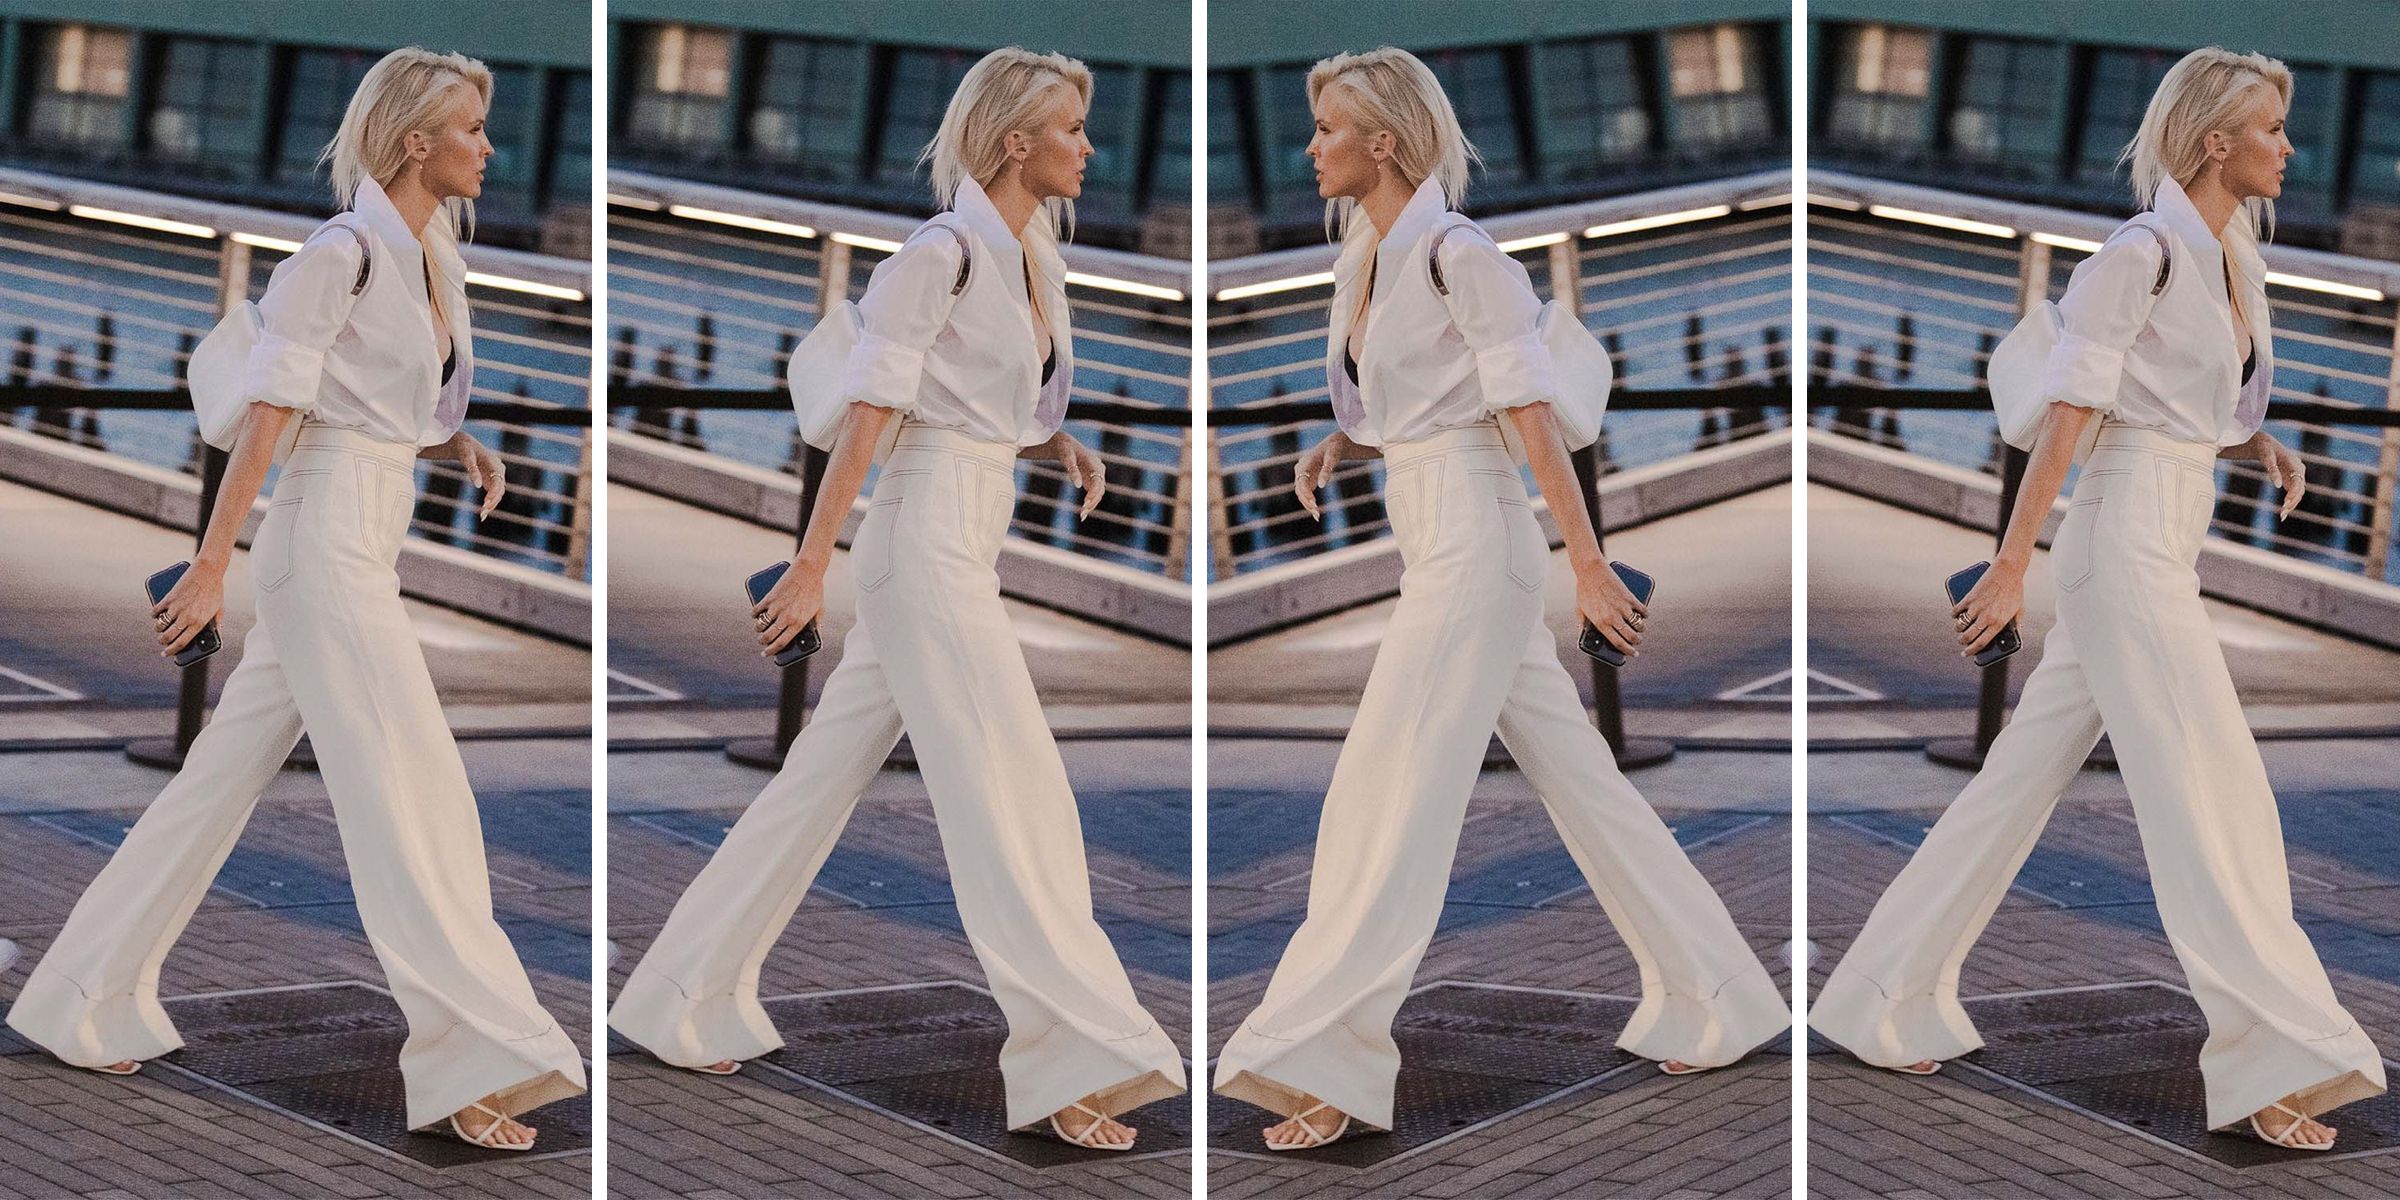 What To Wear With White Jeans - Outfit Ideas